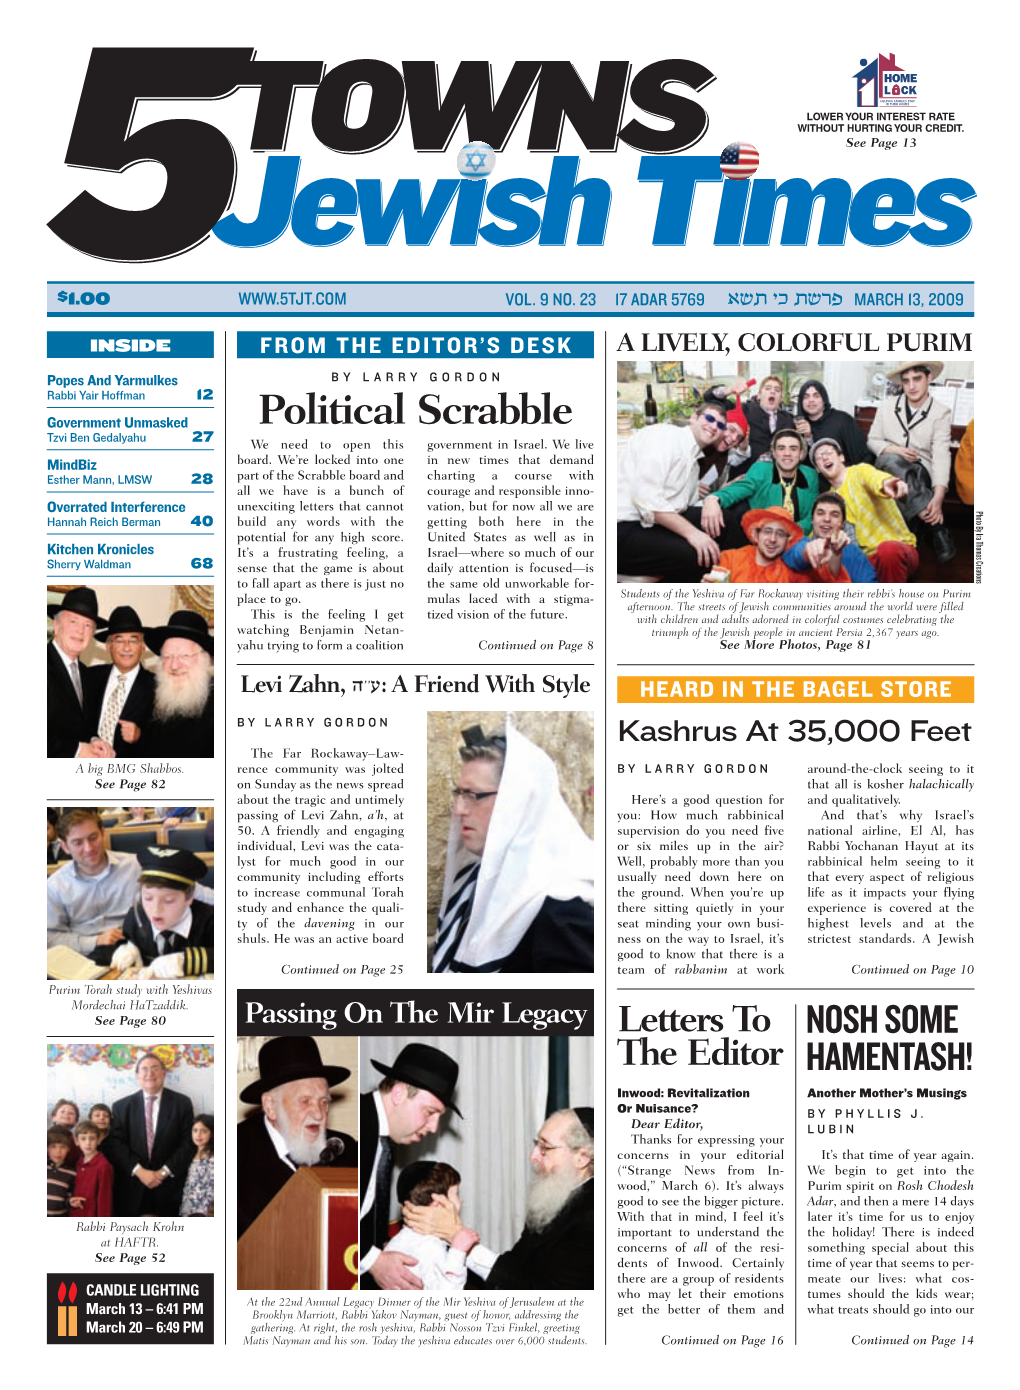 The 5 Towns Jewish Times Footwork